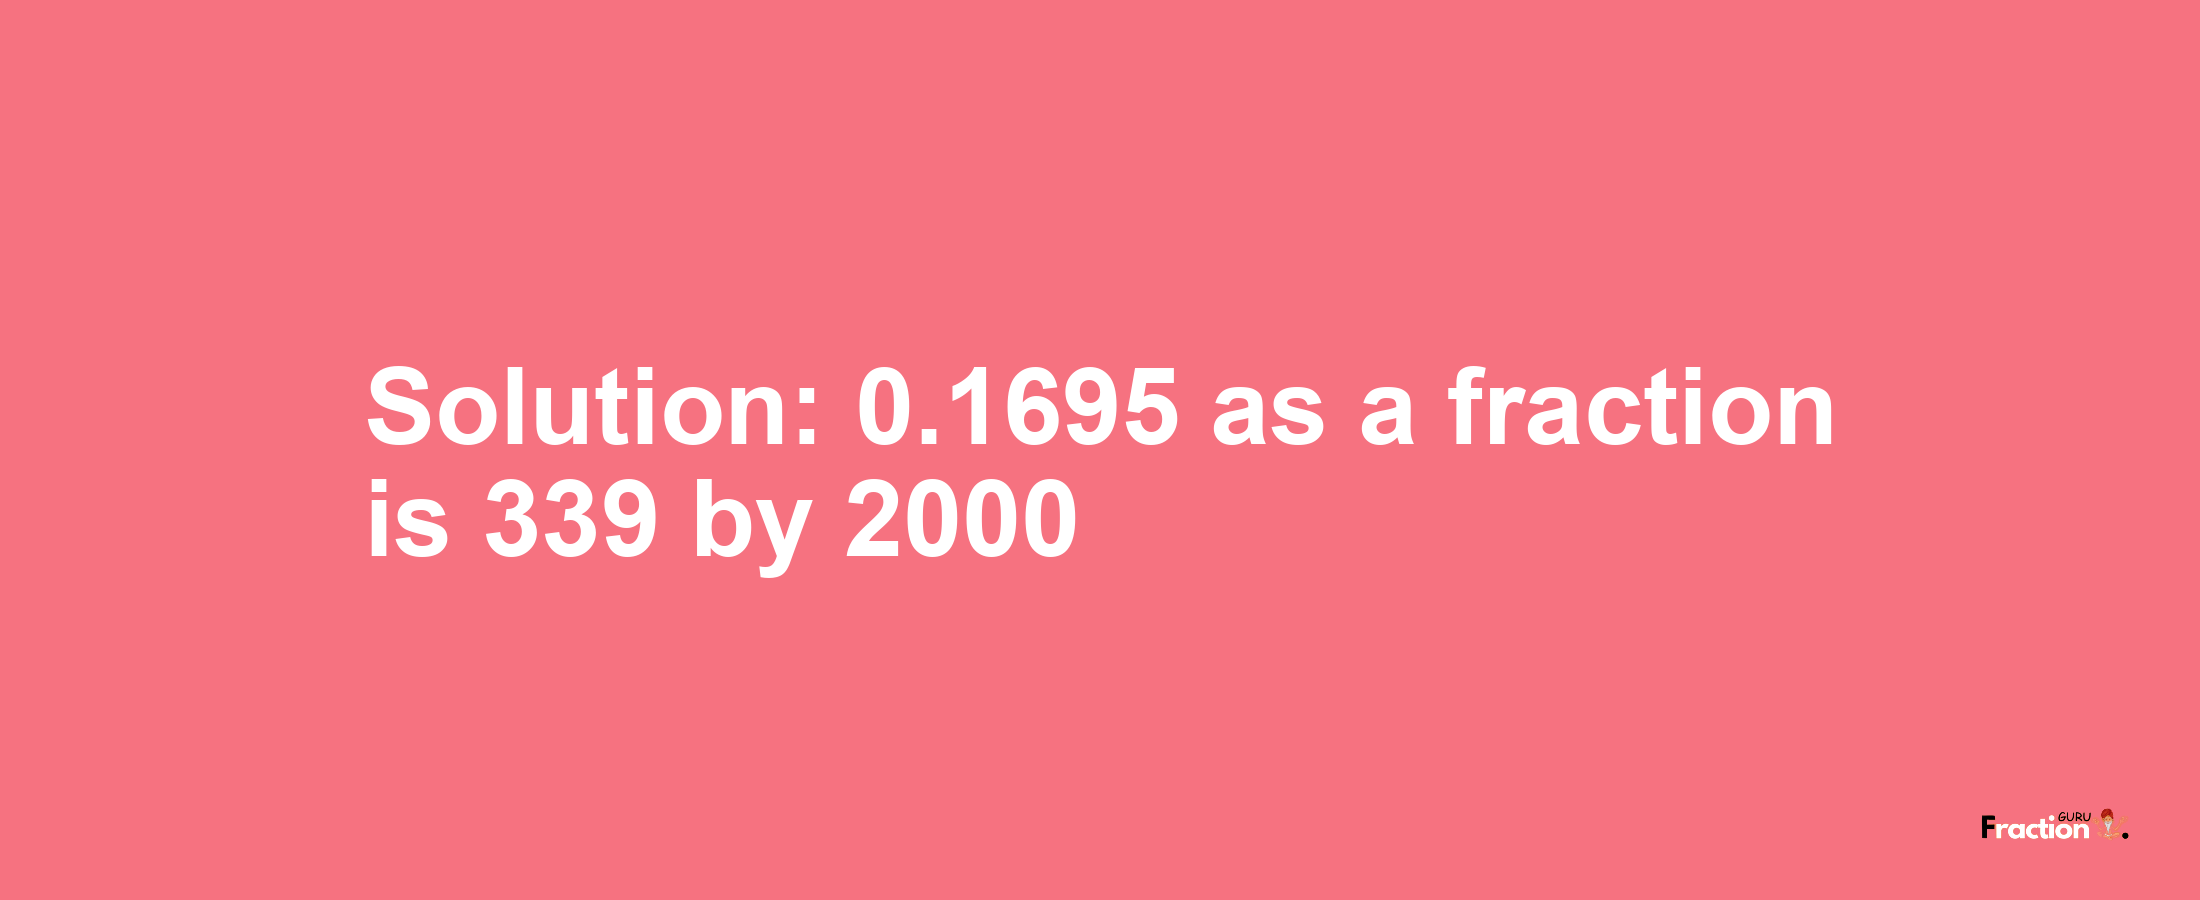 Solution:0.1695 as a fraction is 339/2000